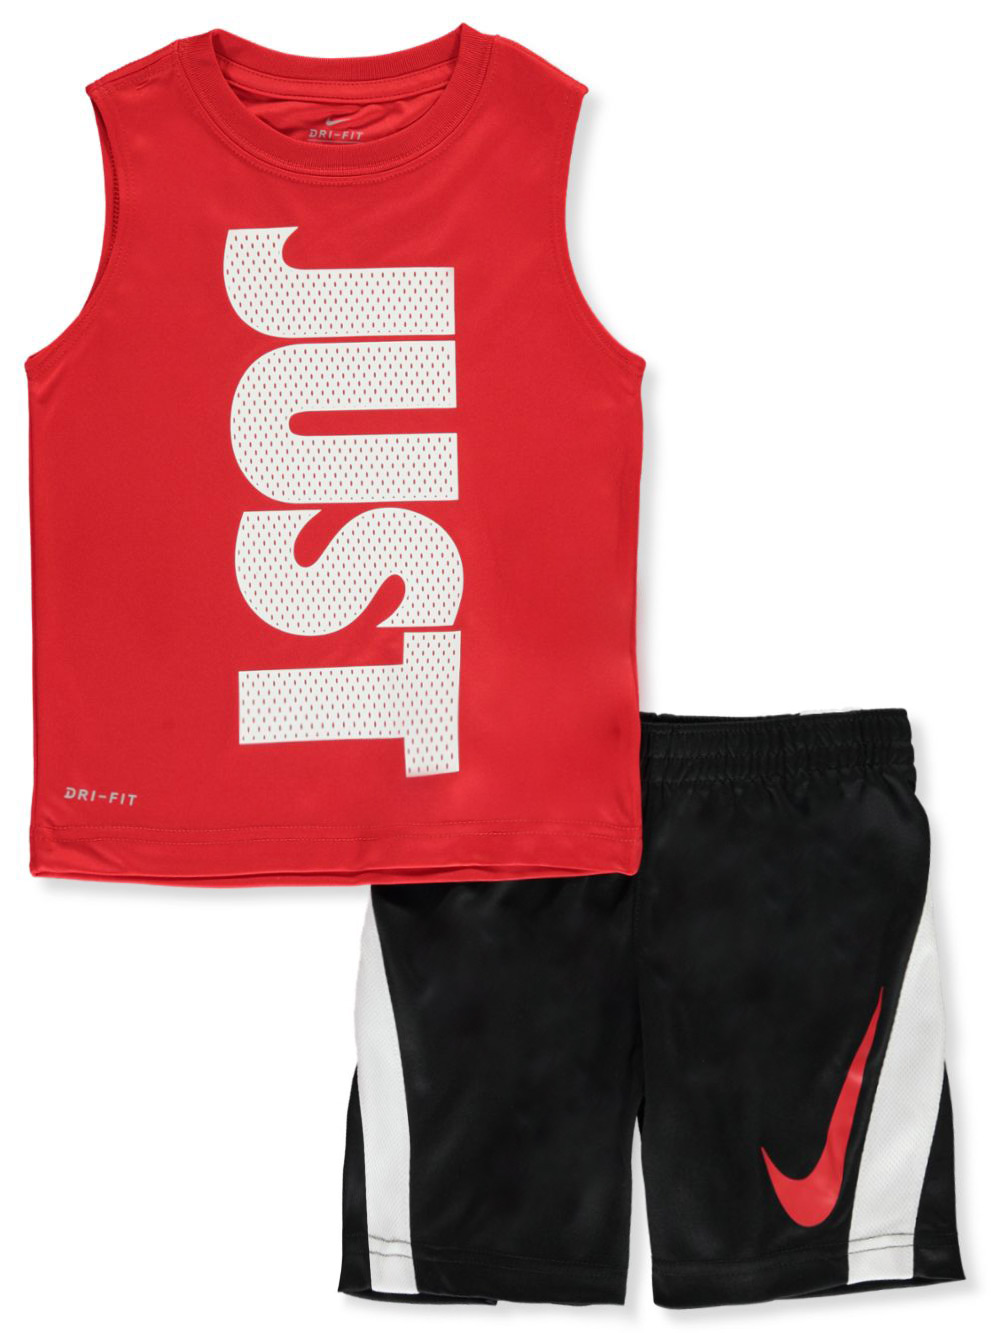 nike short set outfit